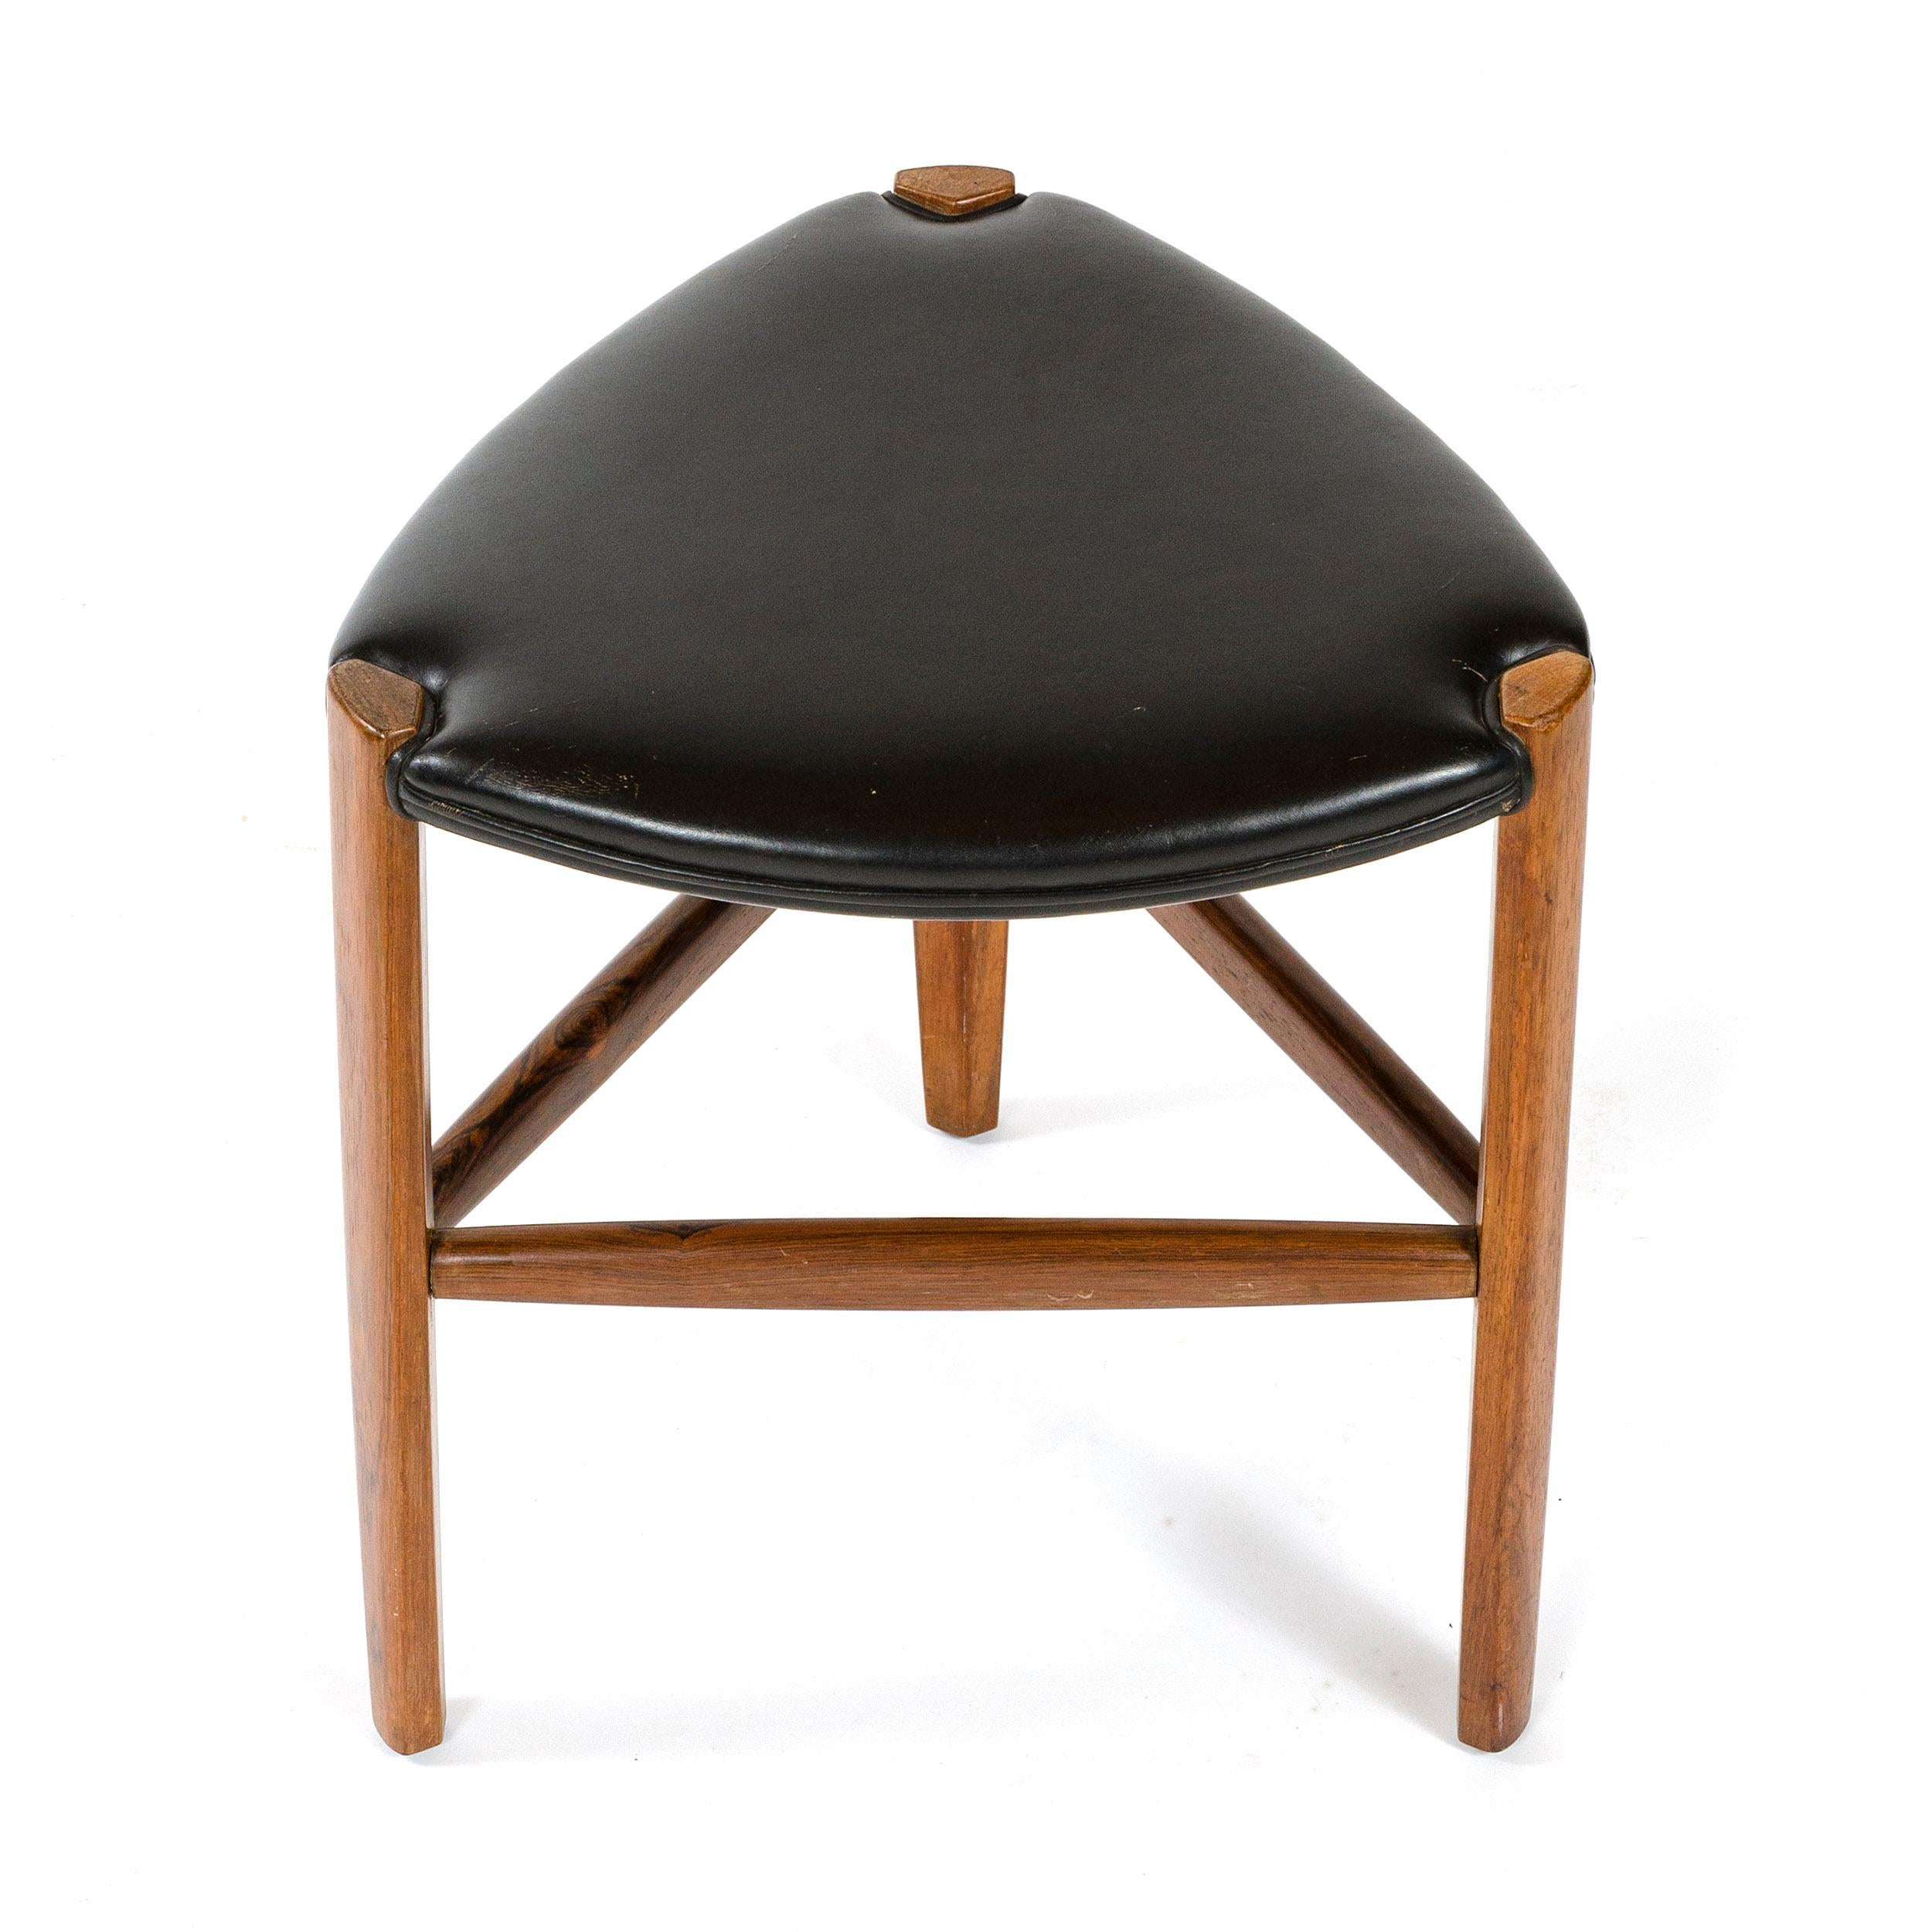 1960s Danish Rosewood Stool by Ole Wanscher for A.J. Iversen In Good Condition For Sale In Sagaponack, NY